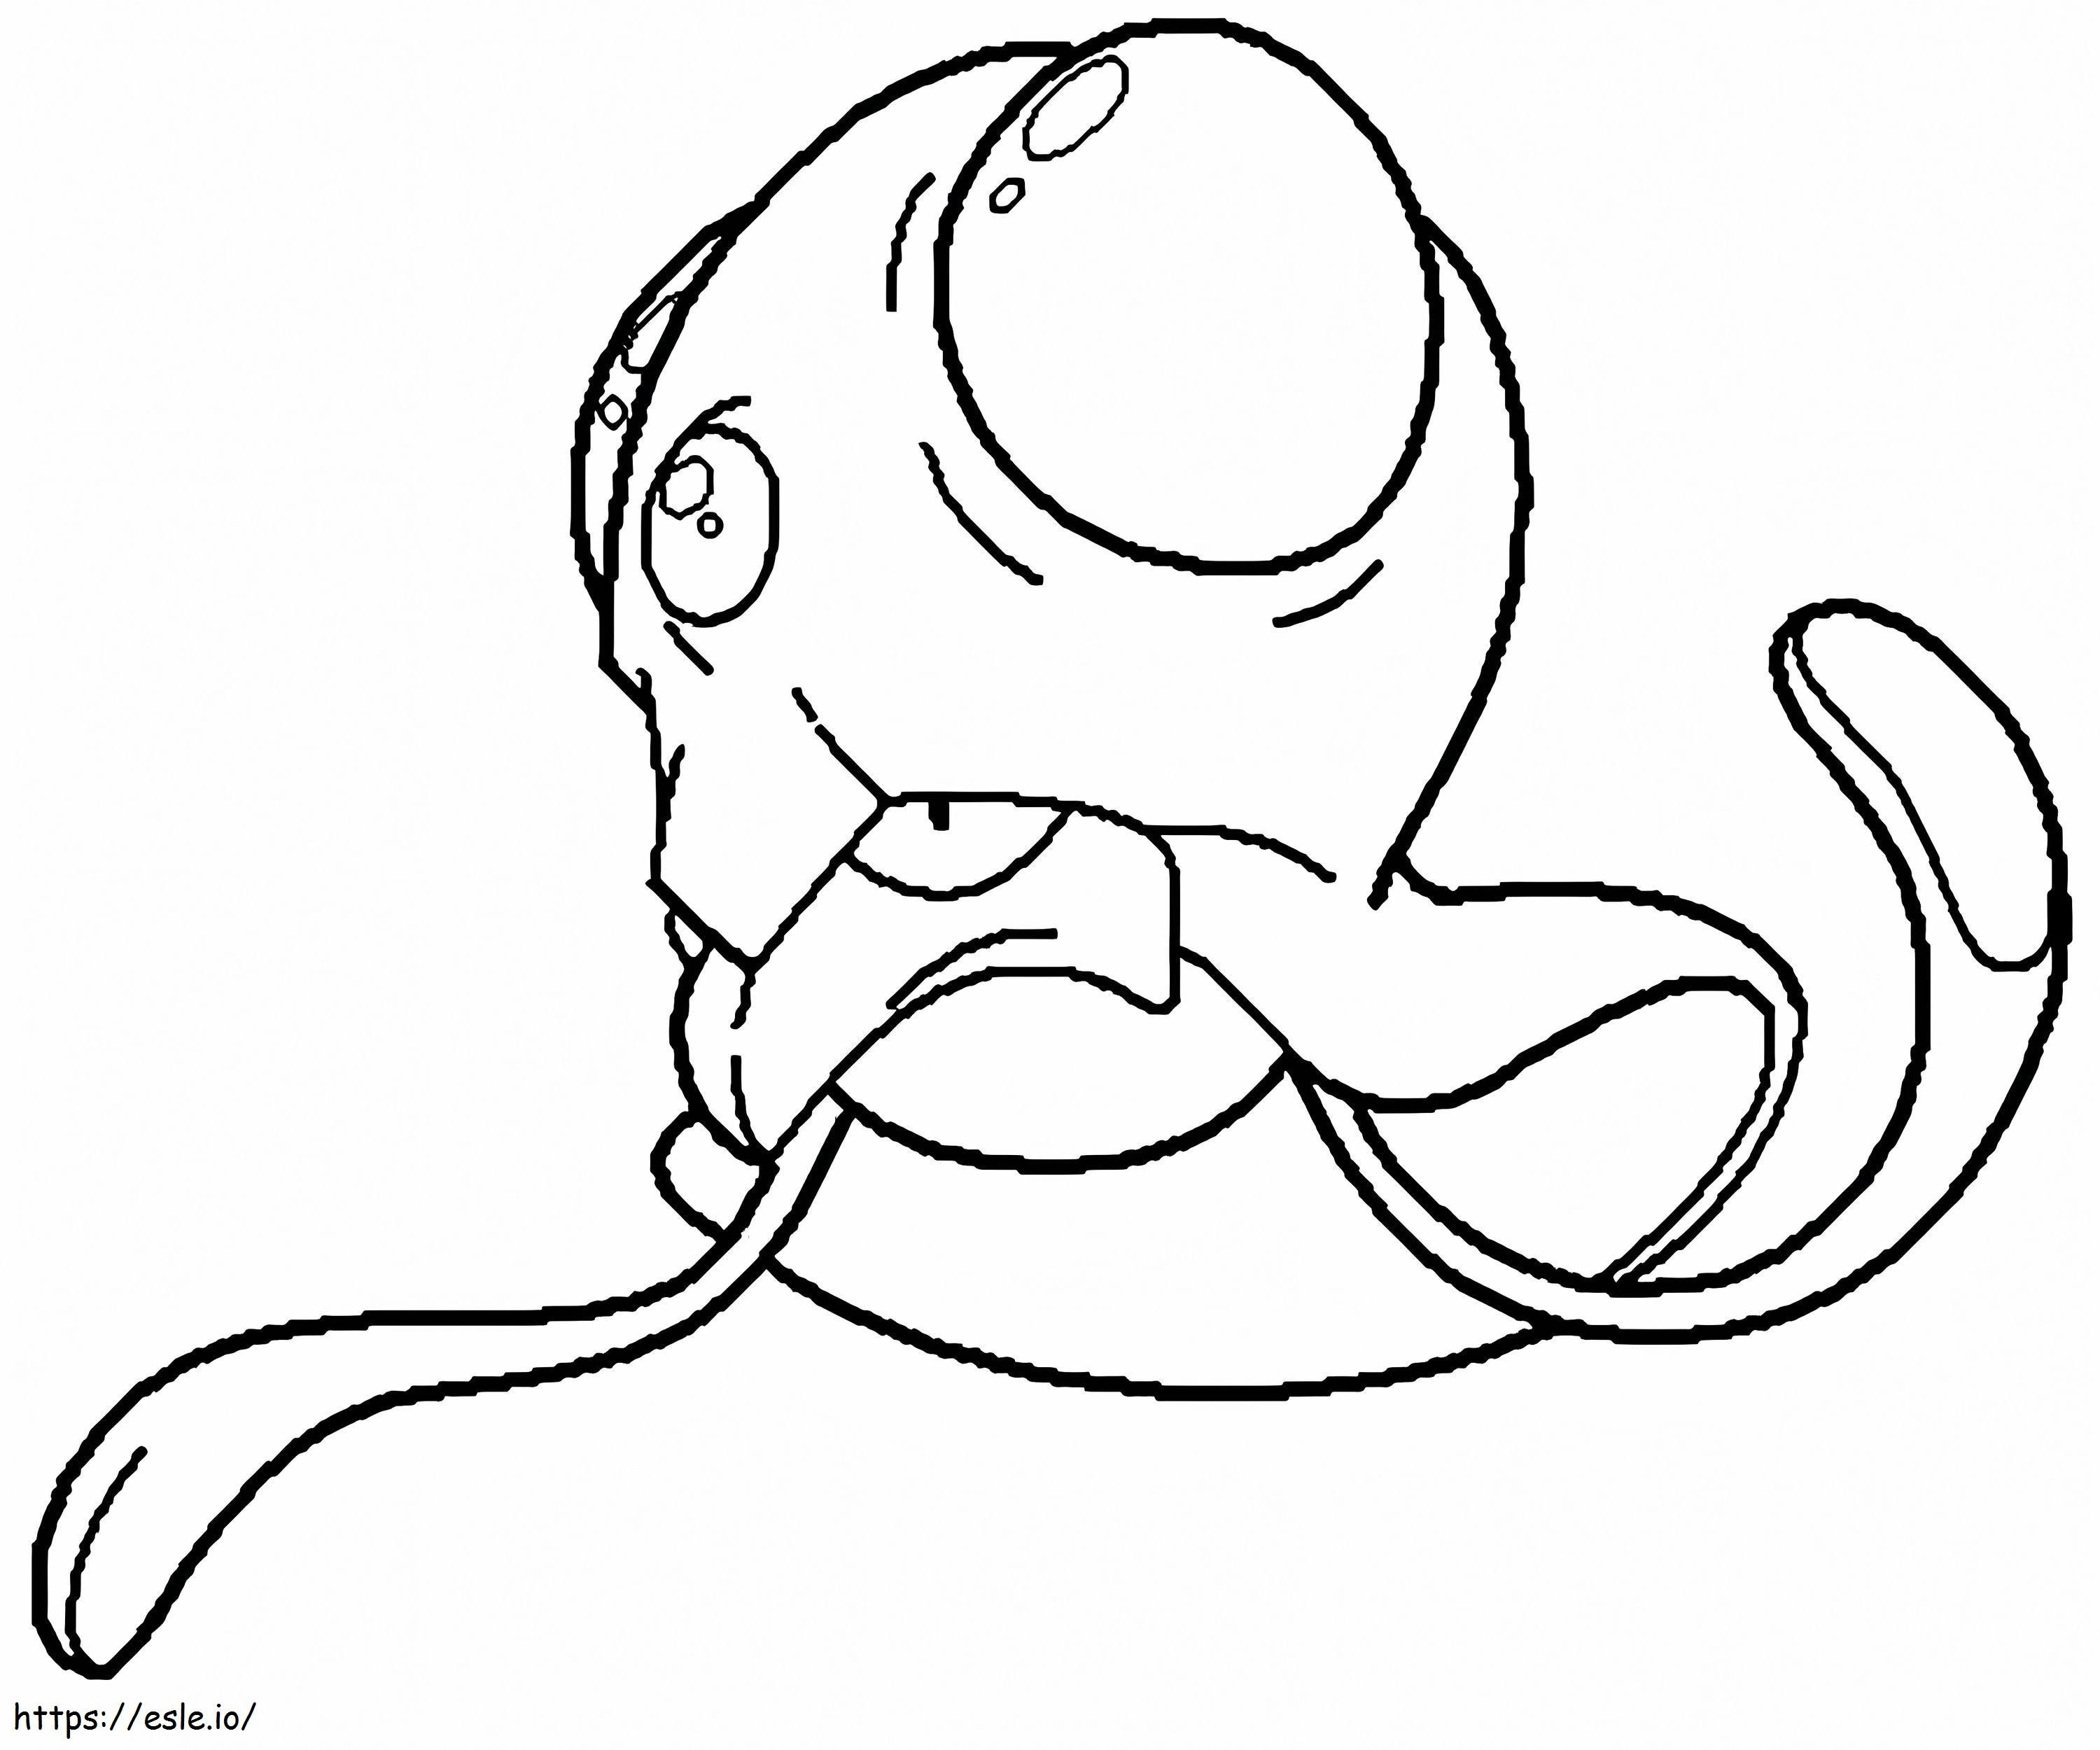 Tentacool 1 coloring page